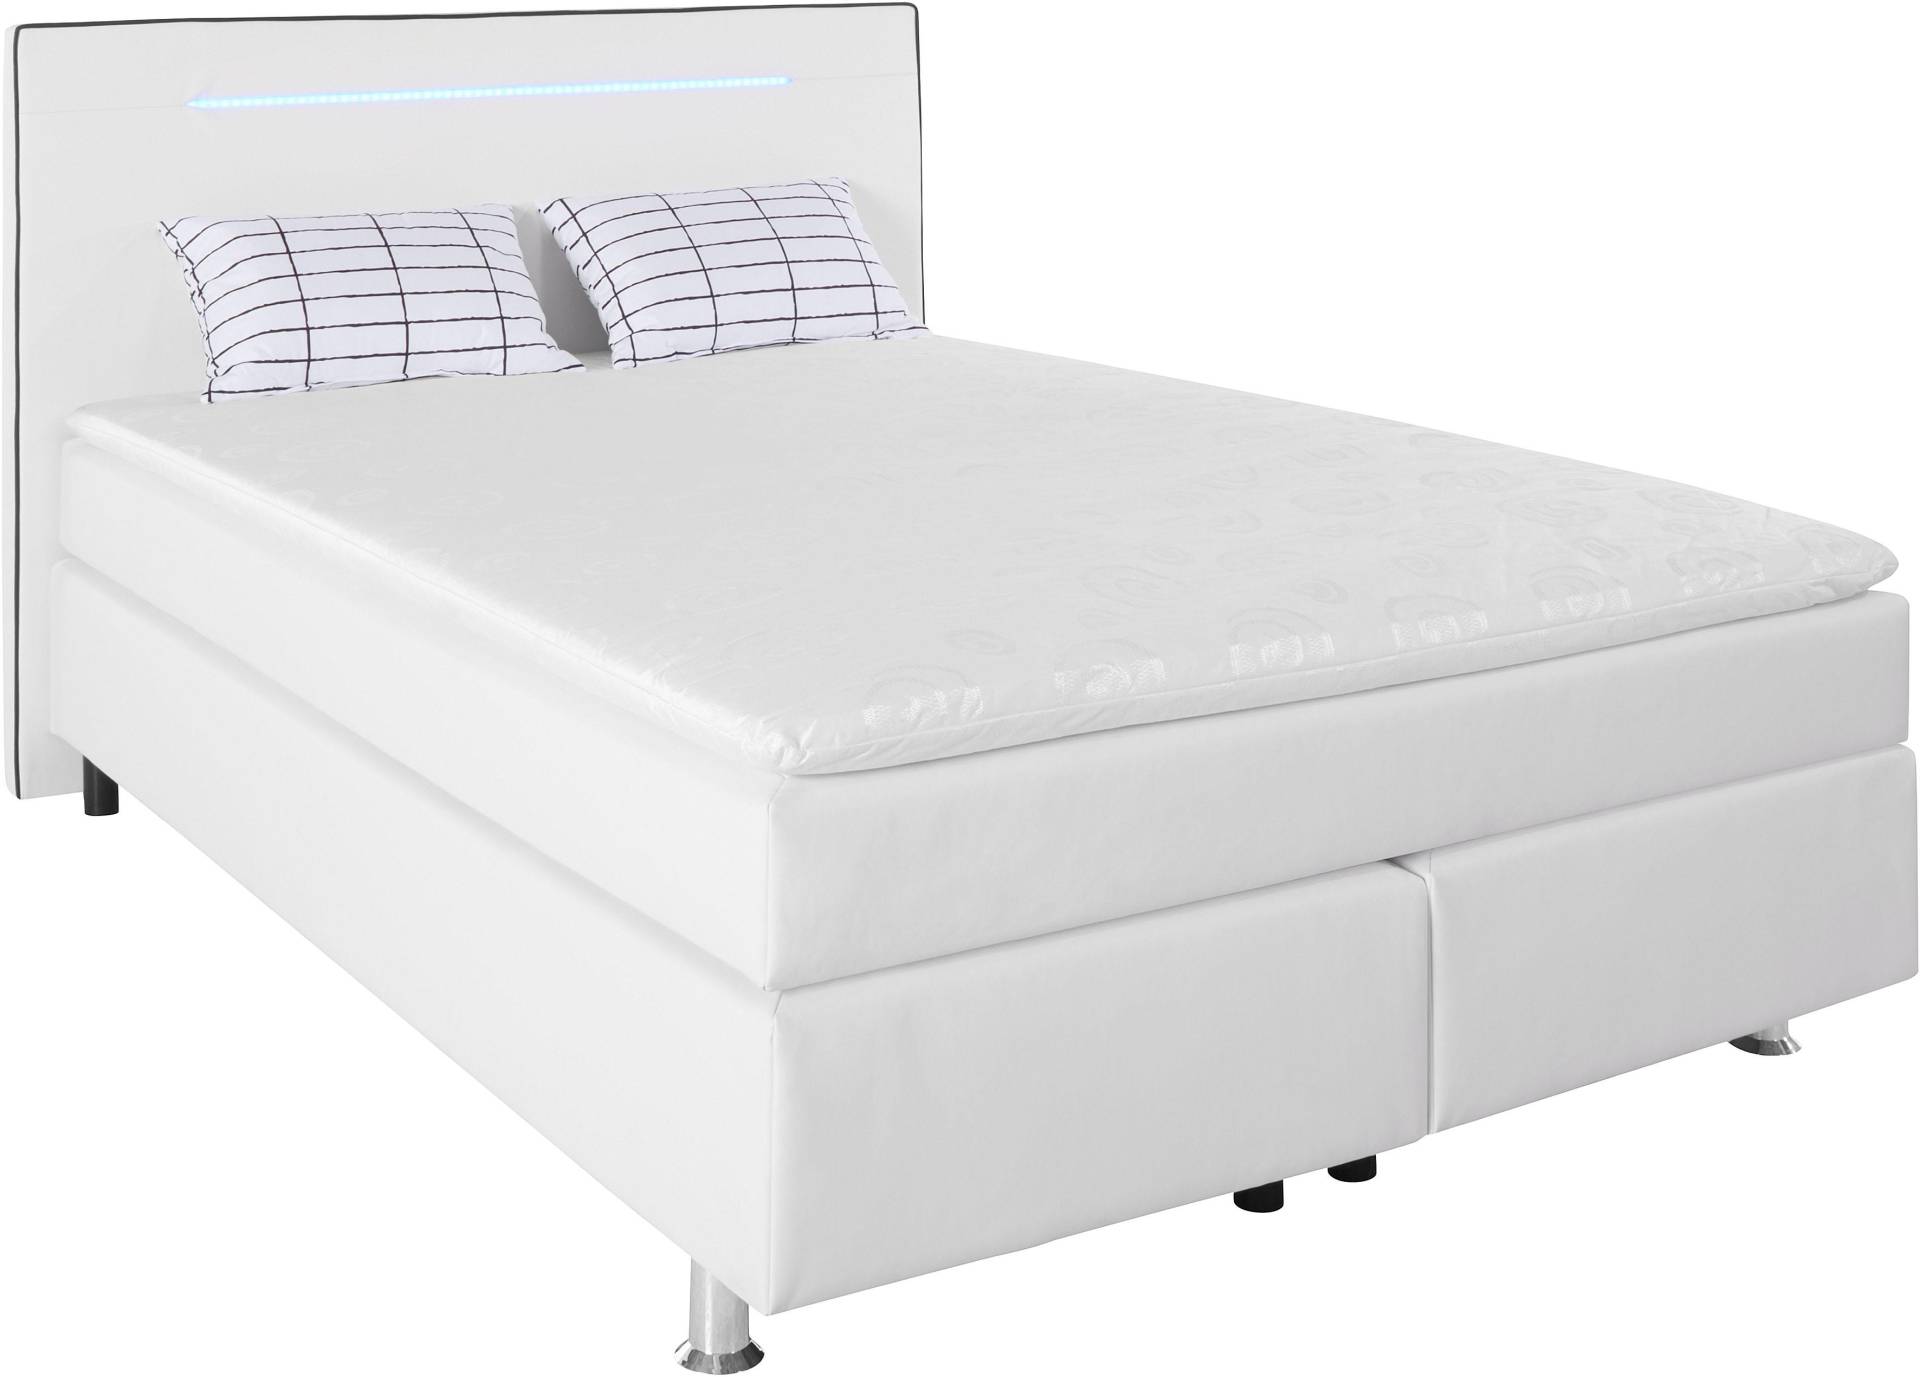 COLLECTION AB Boxspringbett, inkl. LED-Beleuchtung, Topper und Kissen von Collection Ab